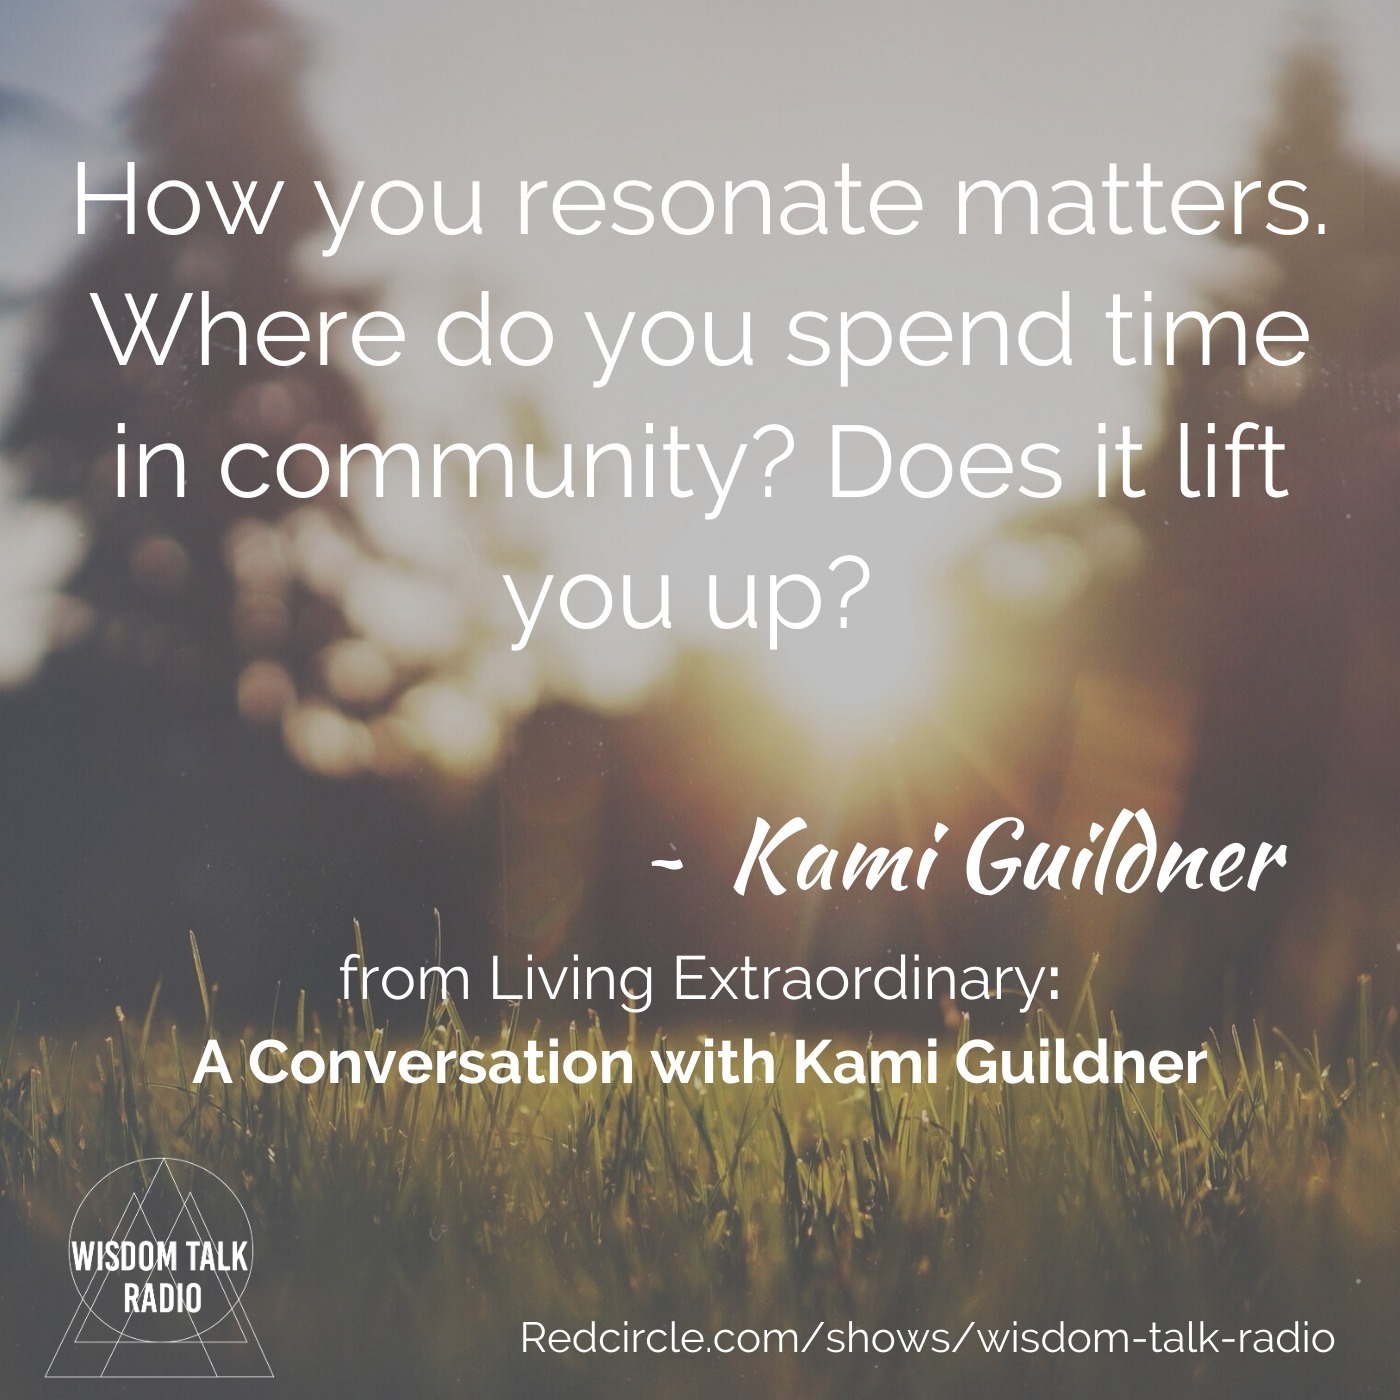 Living Extraordinary: A Conversation with Kami Guildner